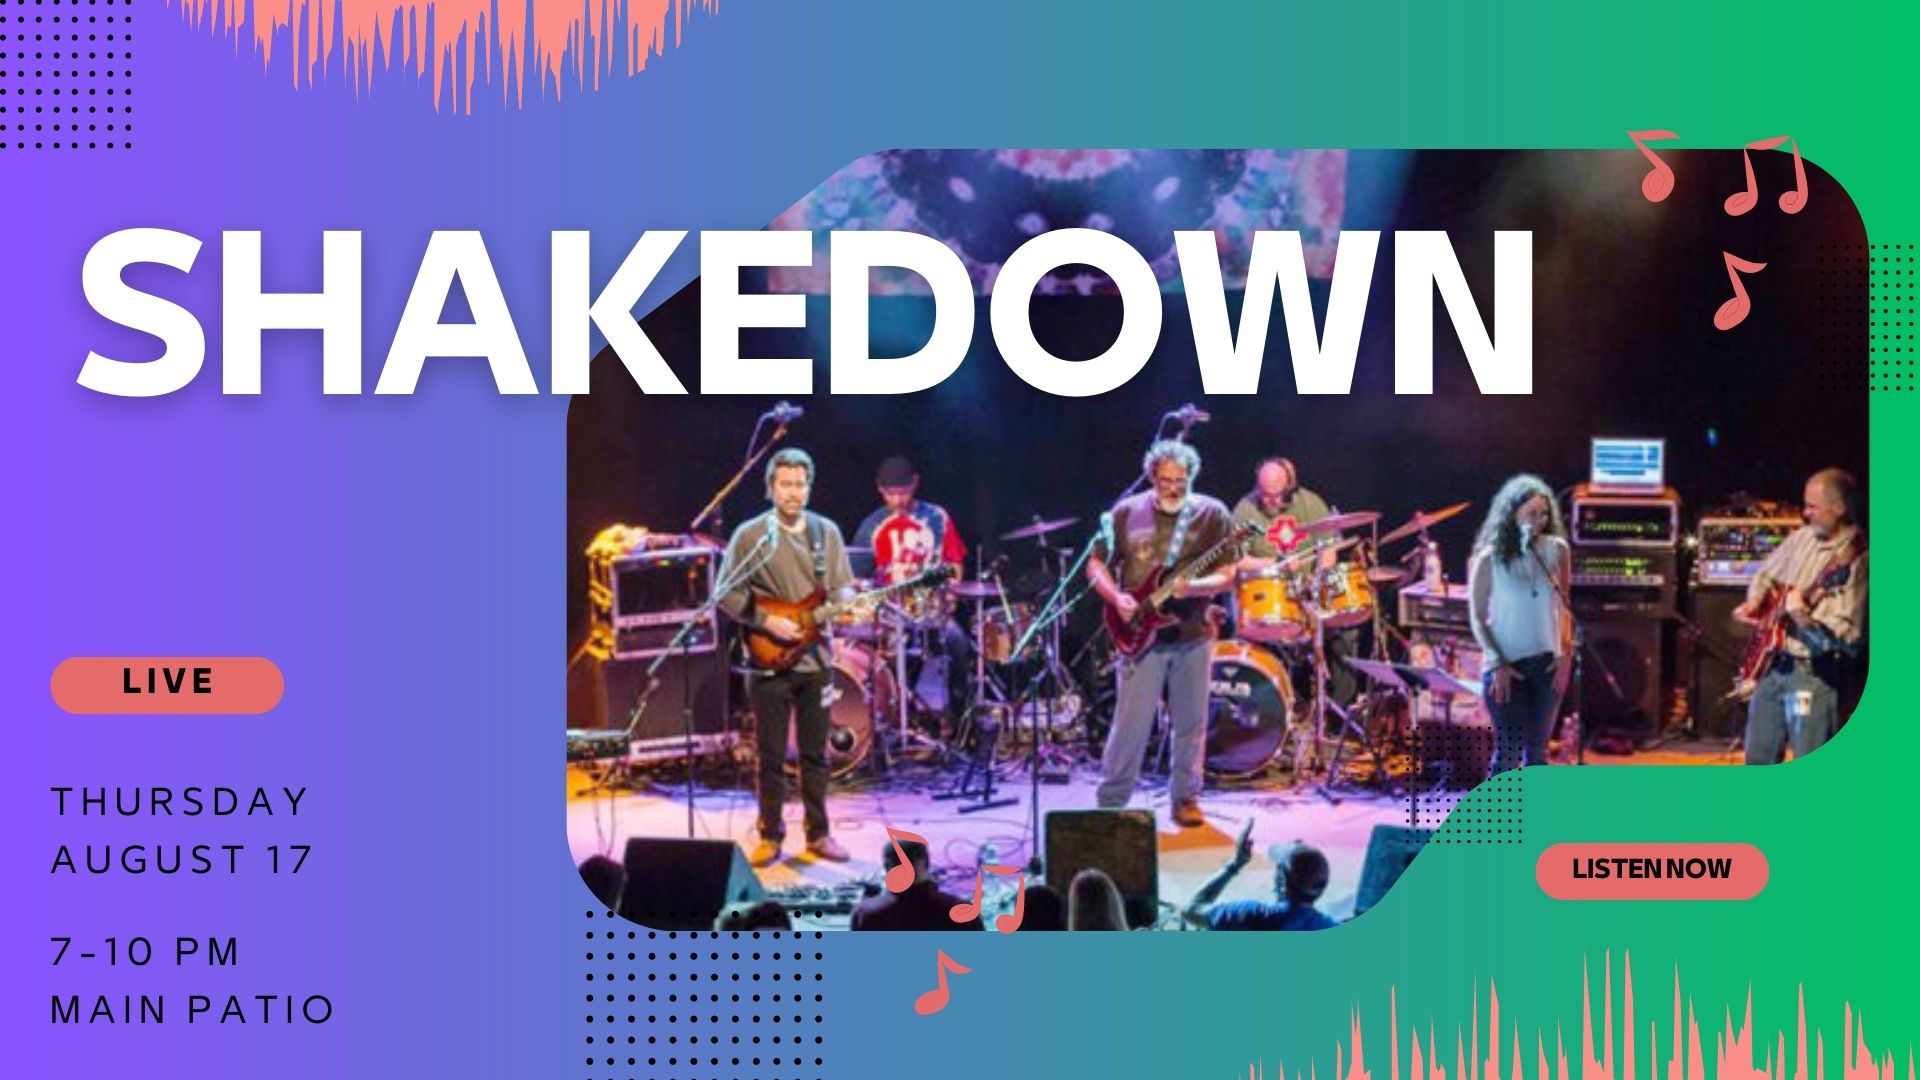 promotional graphic with photo of shakedown band on stage